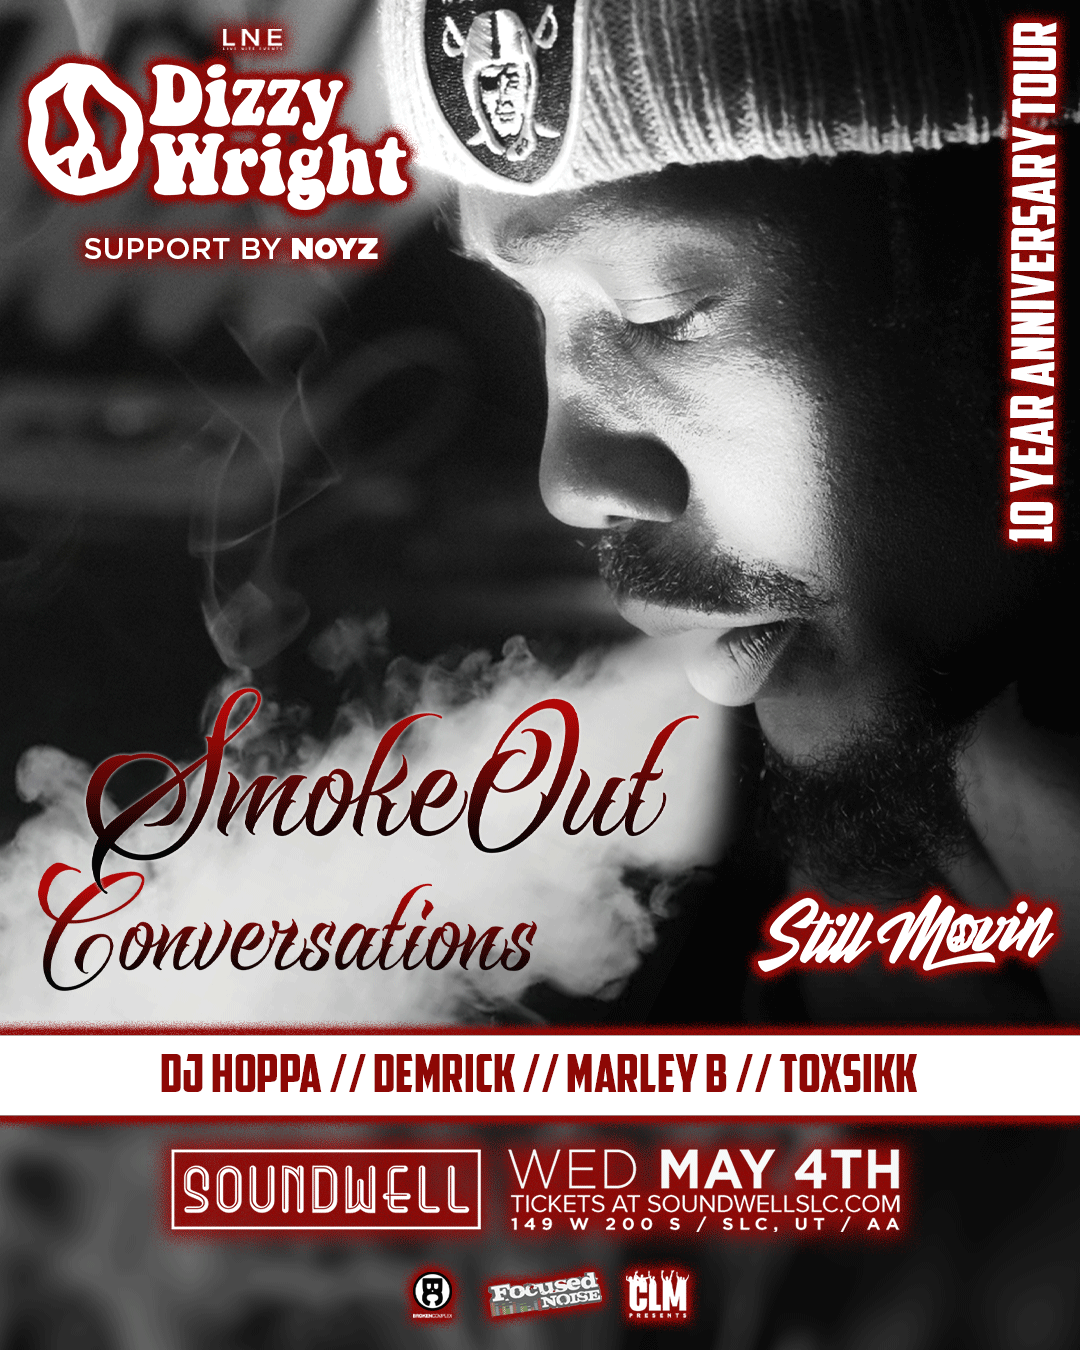 NEW VENUE Dizzy Wright at Soundwell SLC Tickets at Soundwell in Salt